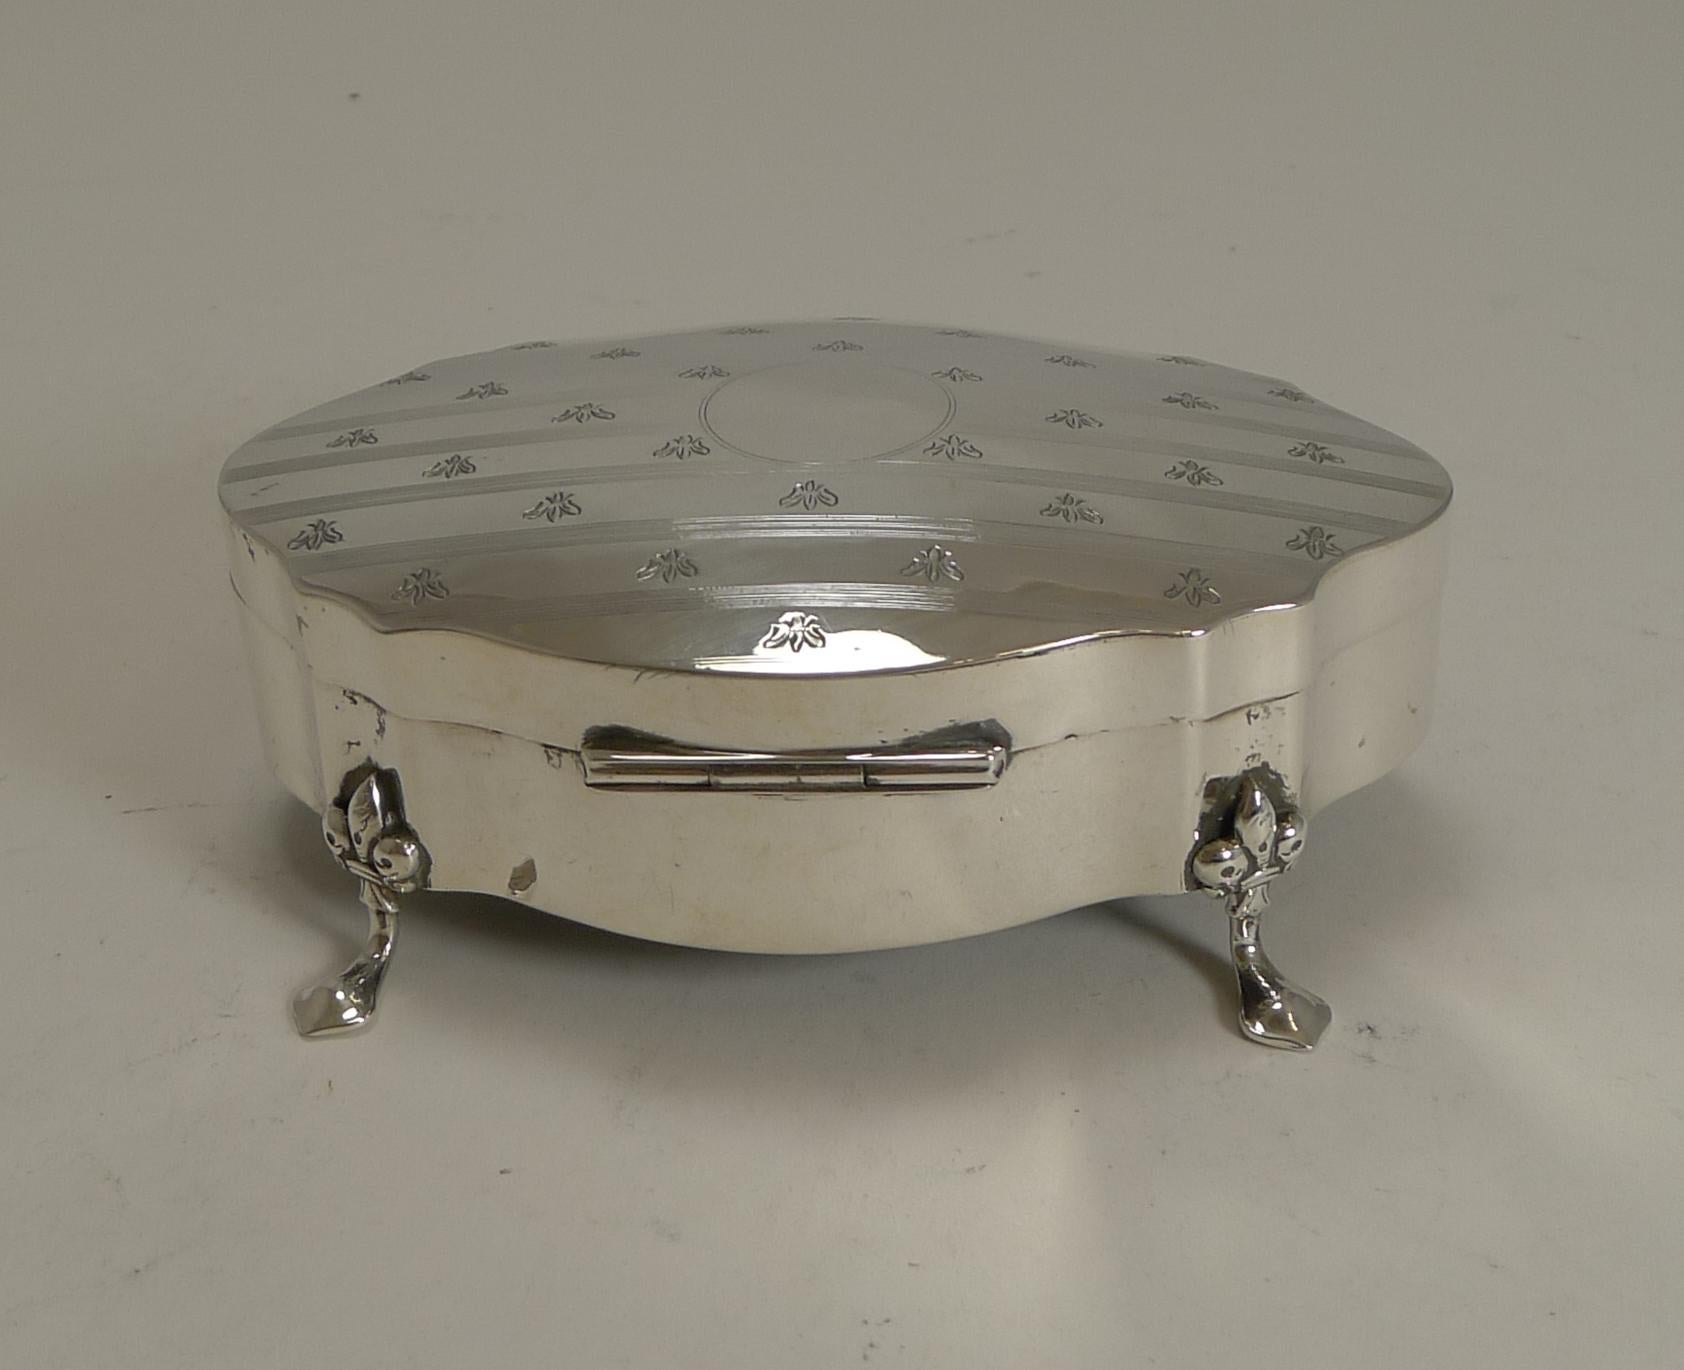 Early 20th Century Antique English Sterling Silver Jewelry / Ring Box - Fleur-de-Lys